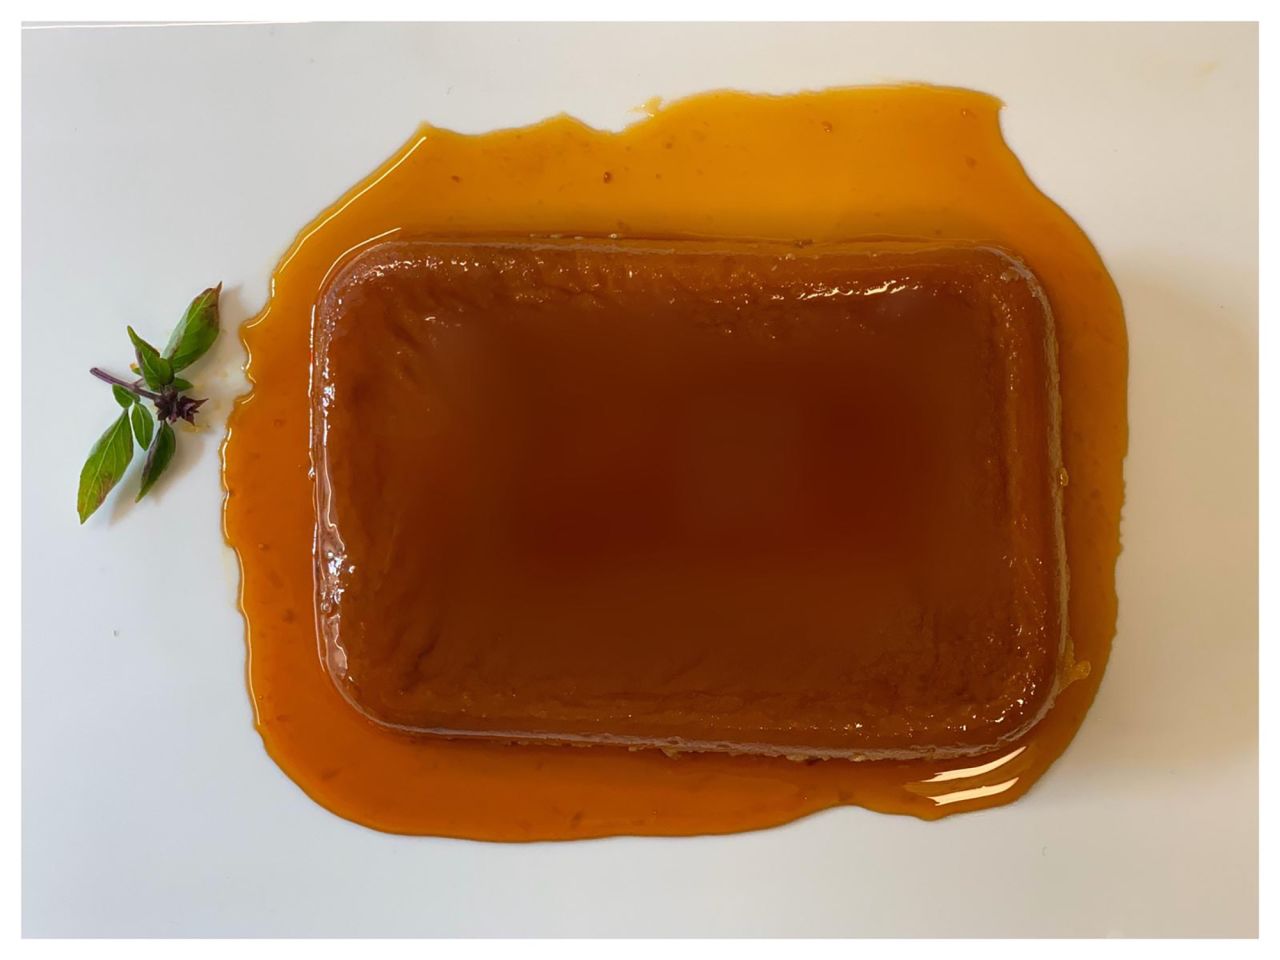 CNN's Luisa Calad says she's always used cooking as a coping mechanism. While staying at home in Washington state, she made this caramel dessert. "Making the perfect golden caramel looks easy, but it's not (at least for me)," she said. "This one turned out beautiful, and I used it to make an Argentinean type of flan that was baked in a water bath for four hours. The density and texture of the dessert turned out delicious."